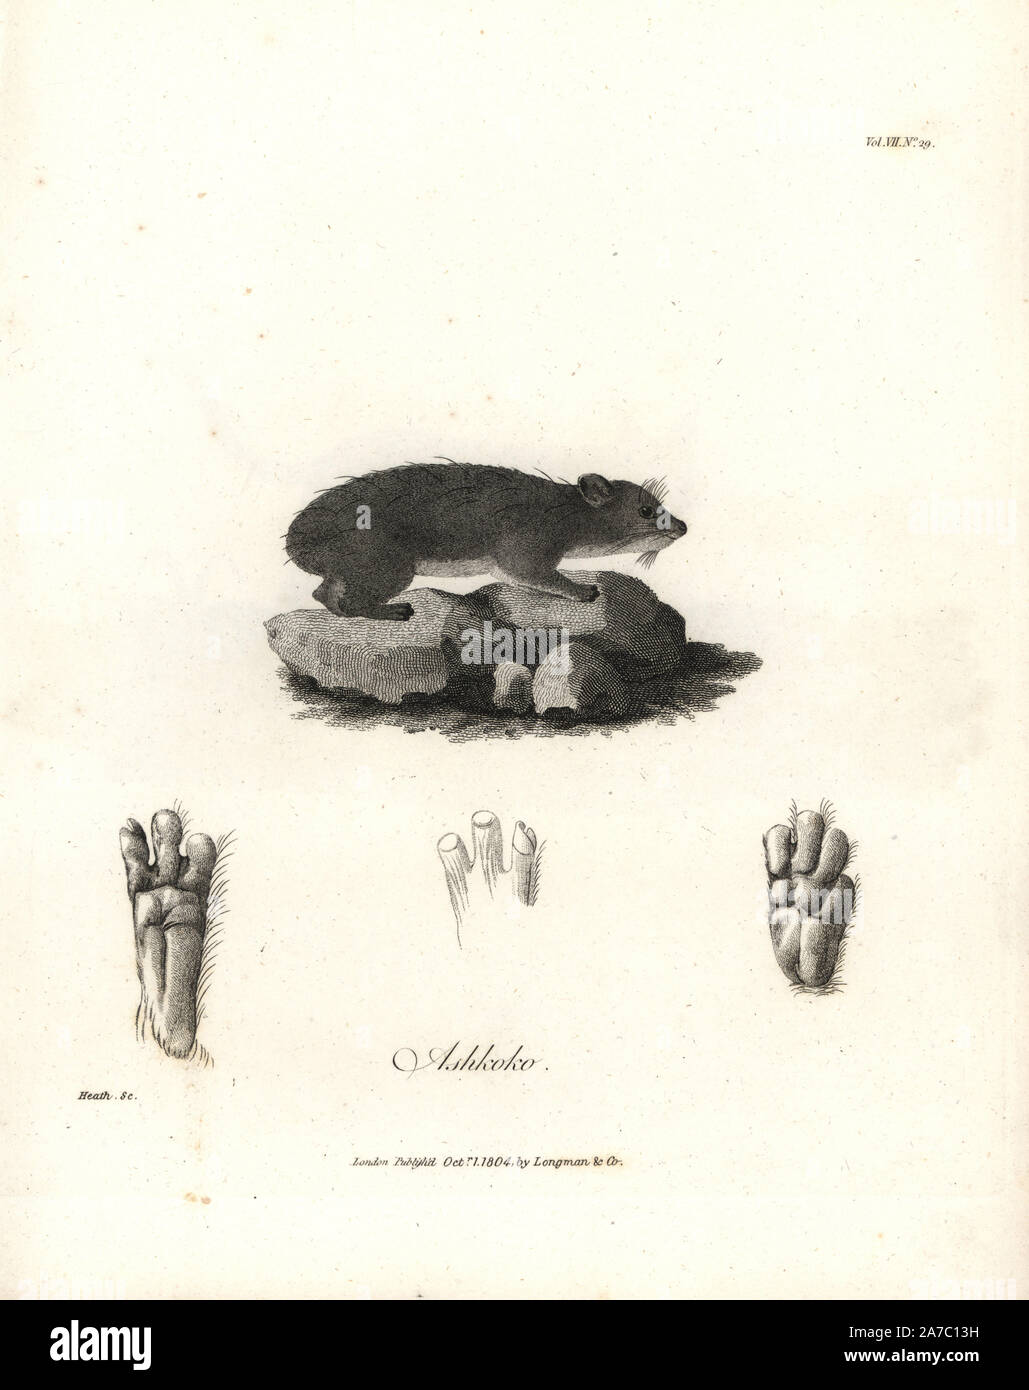 Ashkoko or daman, yellow-spotted rock hyrax, Heterohyrax brucei. Copperplate engraving from James Bruce's 'Travels to Discover the Source of the Nile, in the years 1768, 1769, 1770, 1771, 1772 and 1773,' London, 1790. James Bruce (1730-1794) was a Scottish explorer and travel writer who spent more than 12 years in North Africa and Ethiopia. Engraved by Heath after an original drawing by Bruce. Stock Photo